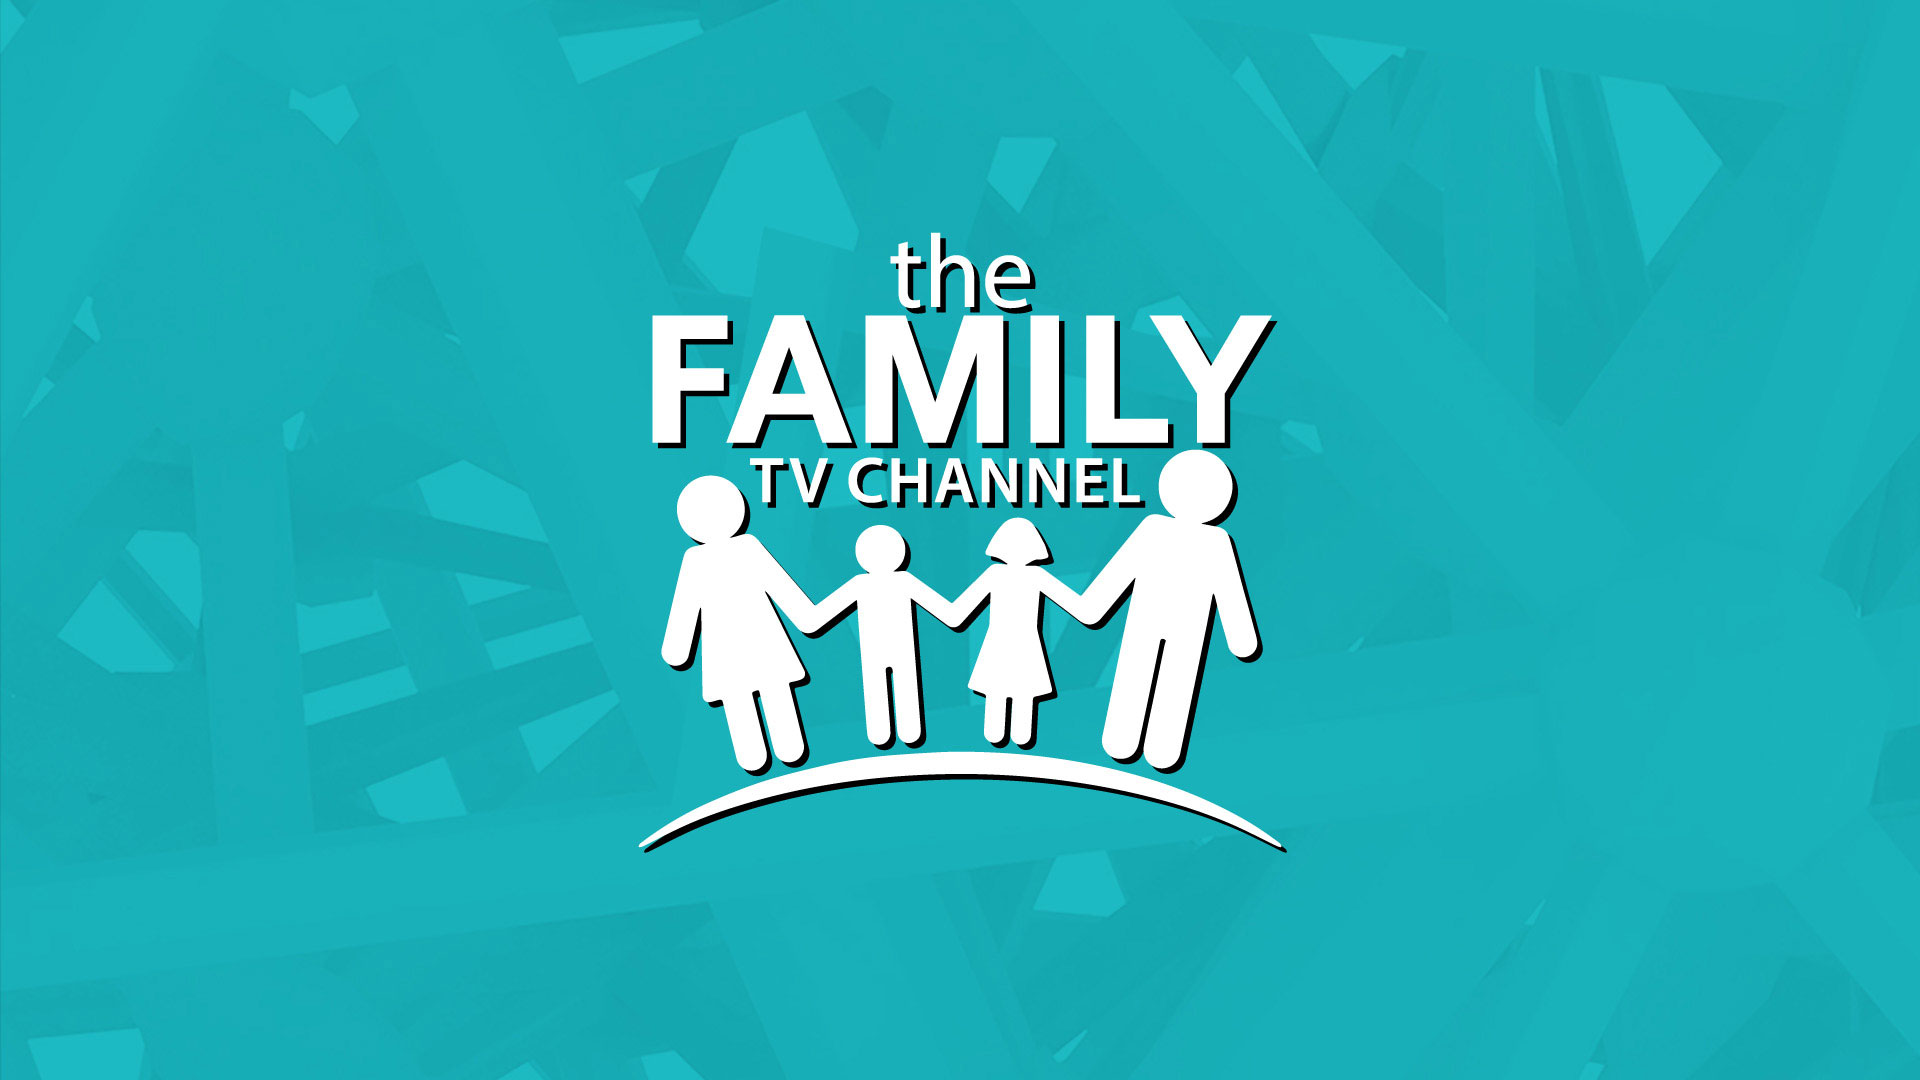 The Family TV Channel